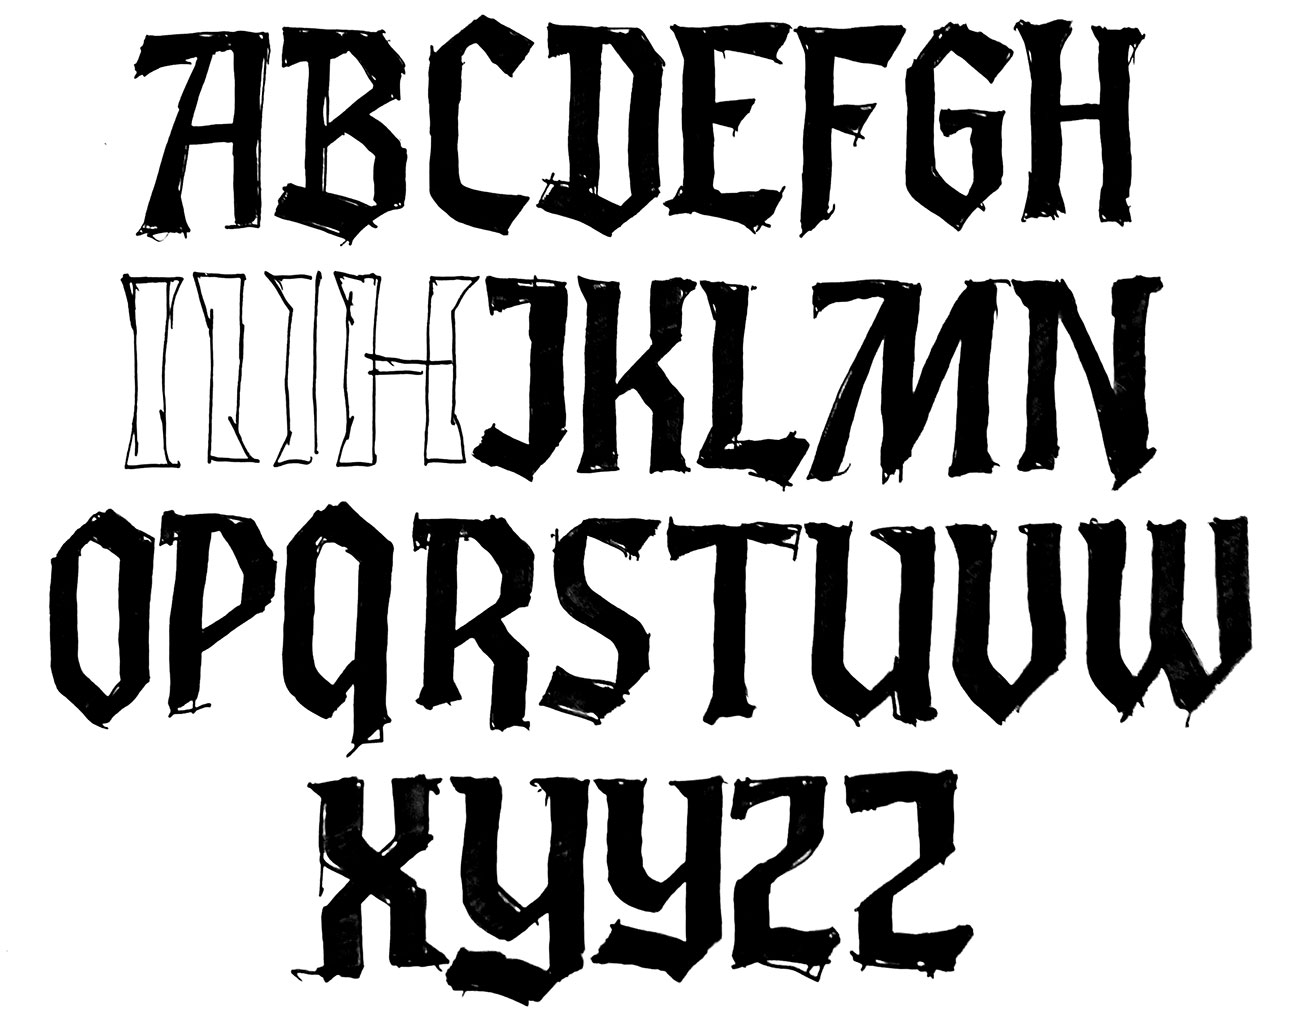 Alphabet of manually drawn capital letters